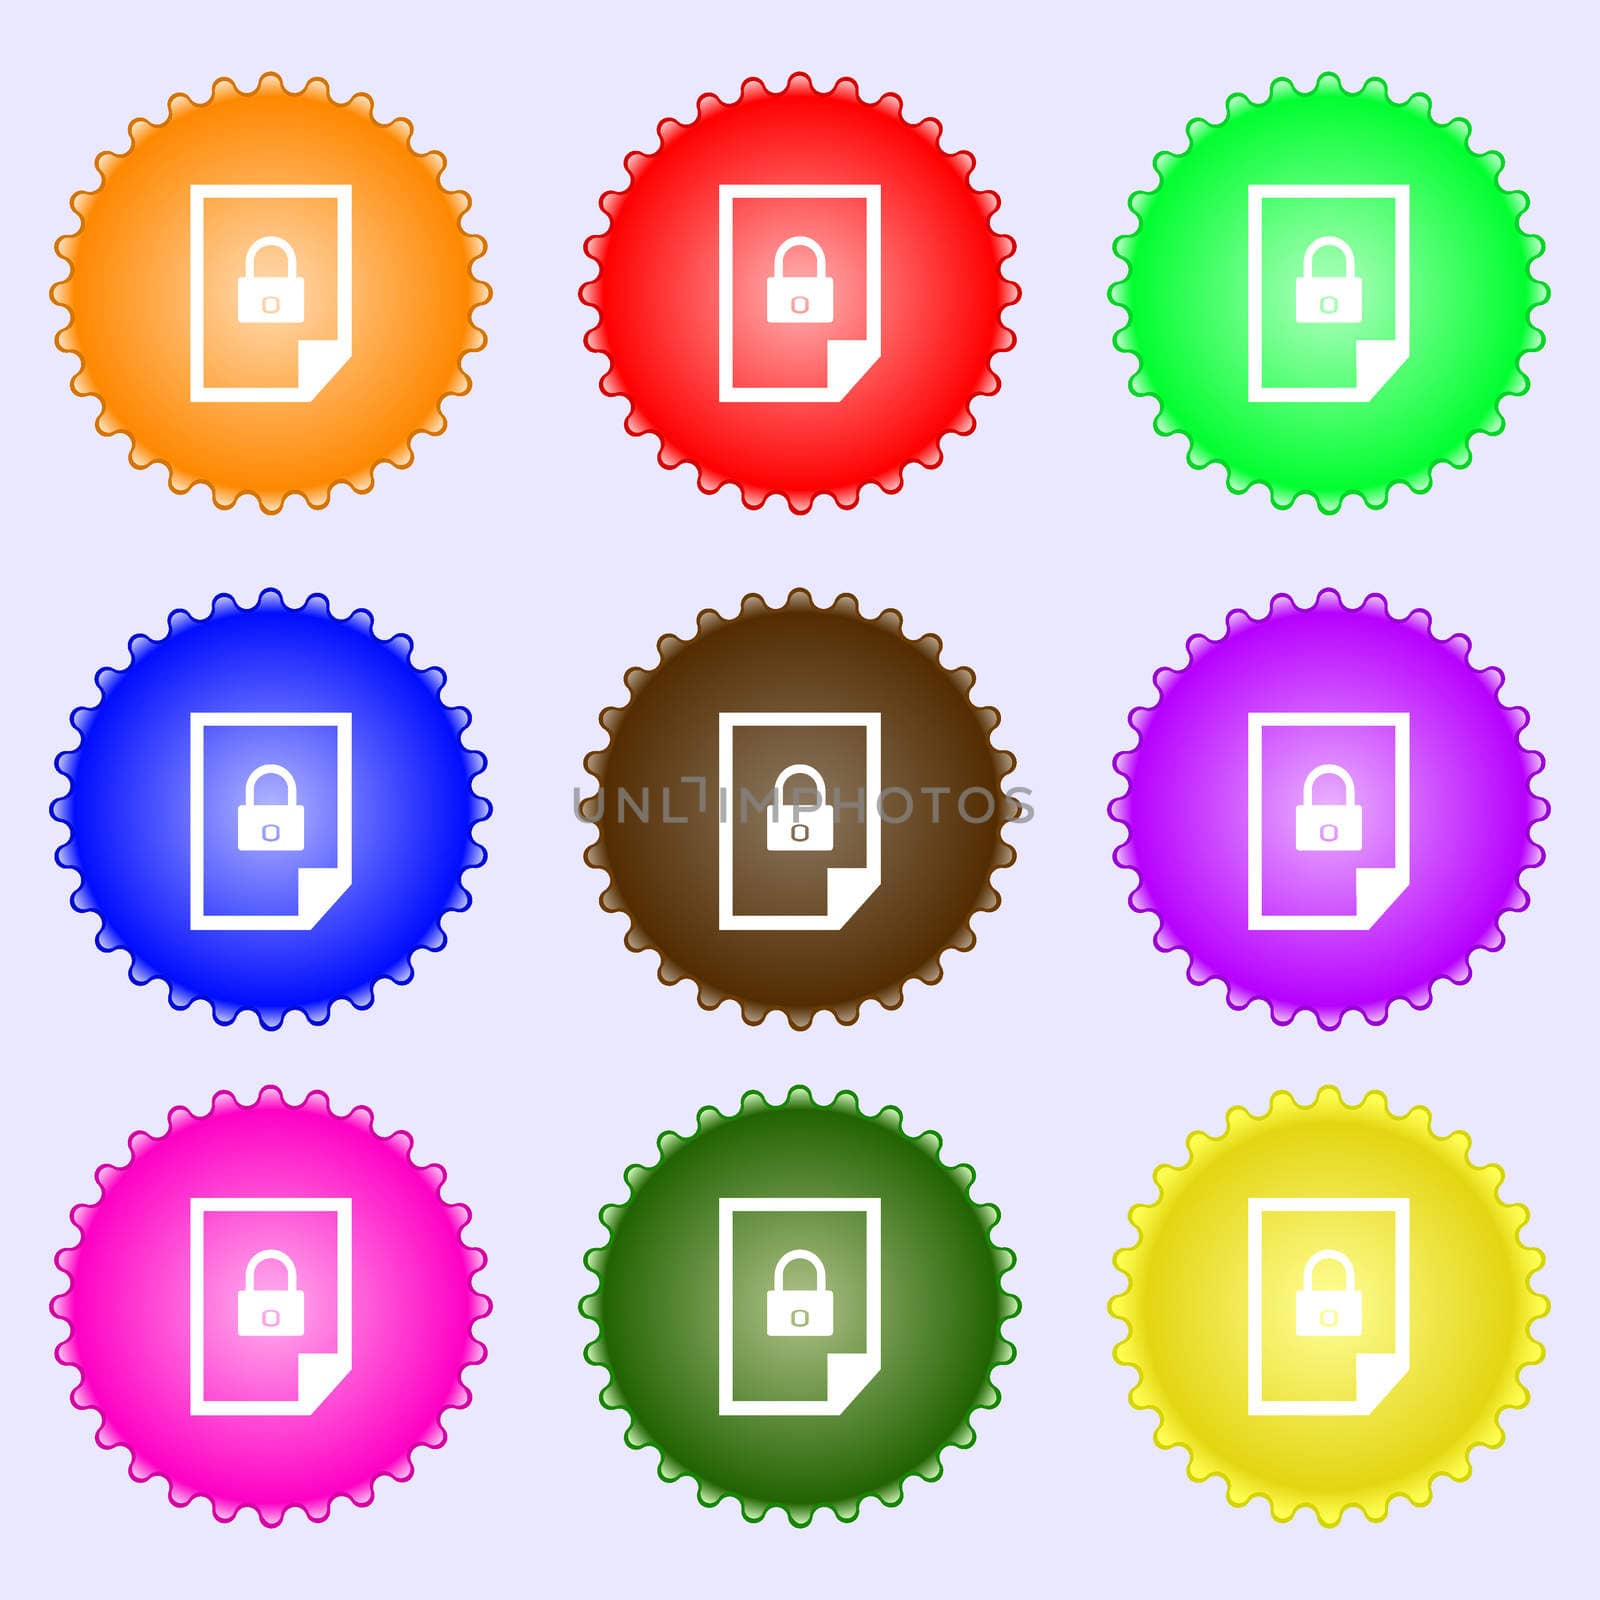 File locked icon sign. A set of nine different colored labels. illustration